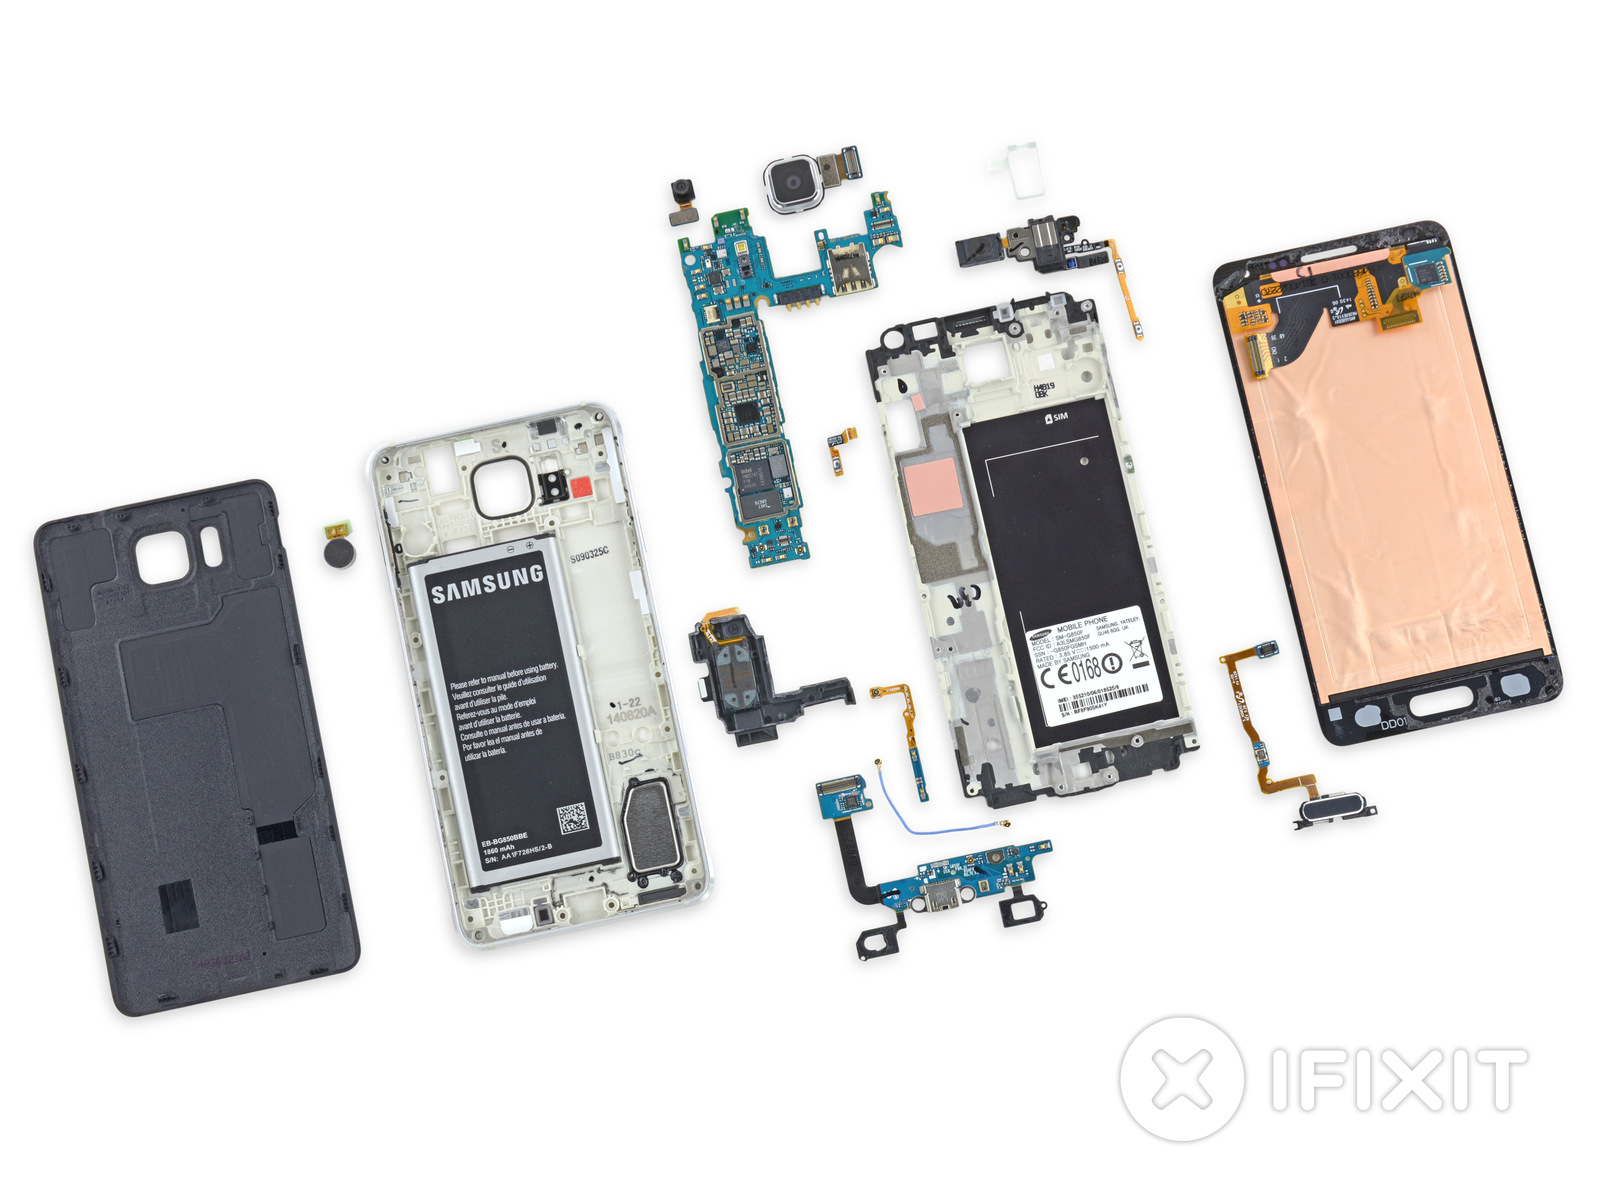 Samsung Galaxy Alpha Torn Down by iFixit, Contains